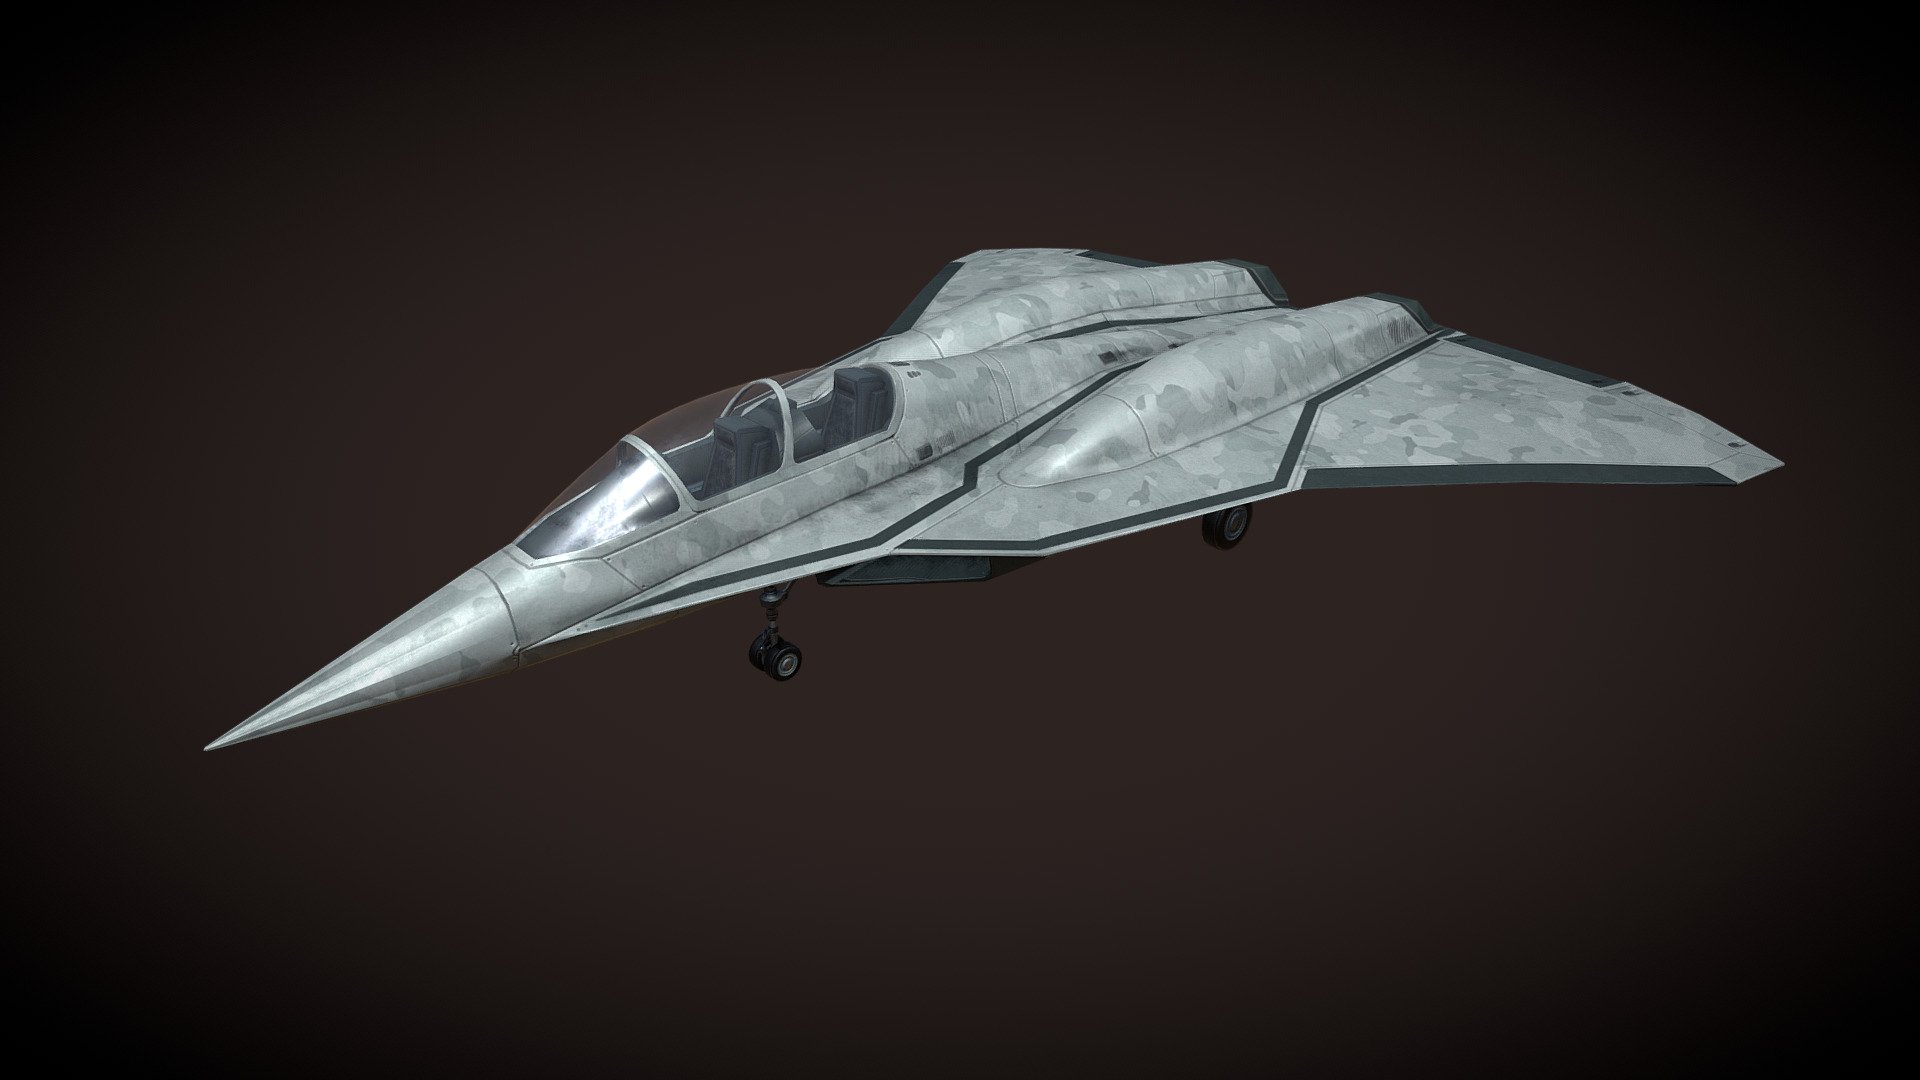 More on my ArtStation : https://www.artstation.com/artwork/baJAvE

SCAF Fighter jet
Lowpoly Fighter jet for flight simulator.
Made with strong production constraints, during my internship at Thales.
Textured at work, without high poly, on photoshop, only with base color, then quickly retouched at home on substance painter for a PBR result.
I had to create a SCAF, an aircraft under development by Dassault Aviation, even if there is almost no existing visual of this aircraft at the moment.
I started from the visuals of the official presentation model of this aircraft, mixed with a Rafale 3d model